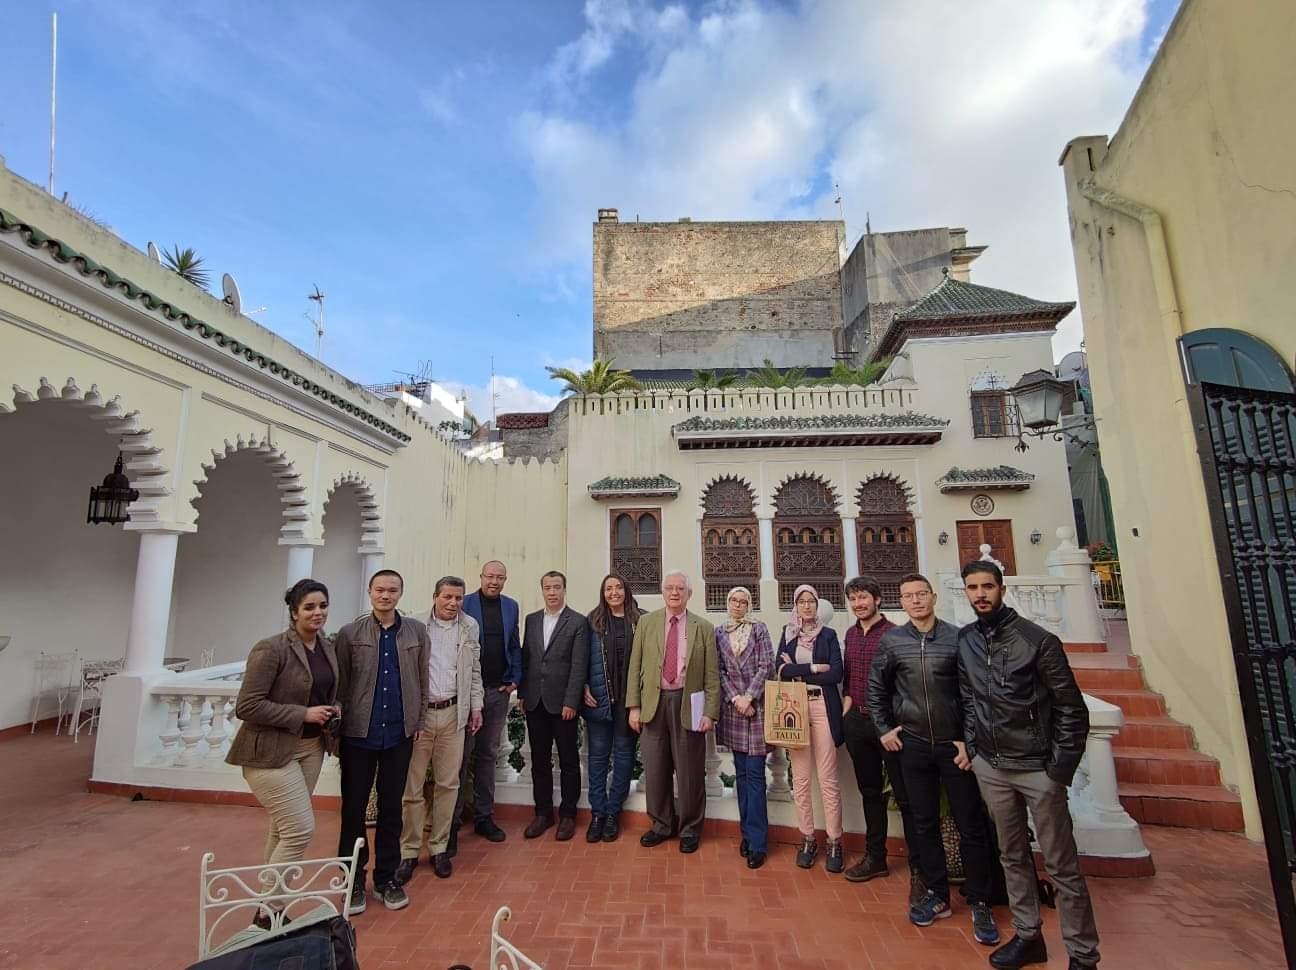 Dale Eickelman ’64, center, poses with Moroccan sociologist Fadma Ait Mous, left, and Moroccan, Chinese, and American participants in a pre-doctoral workshop at the Tangier American Legation Institute for Moroccan Studies in February 2020. (Photo by Ayoub Lahlou)